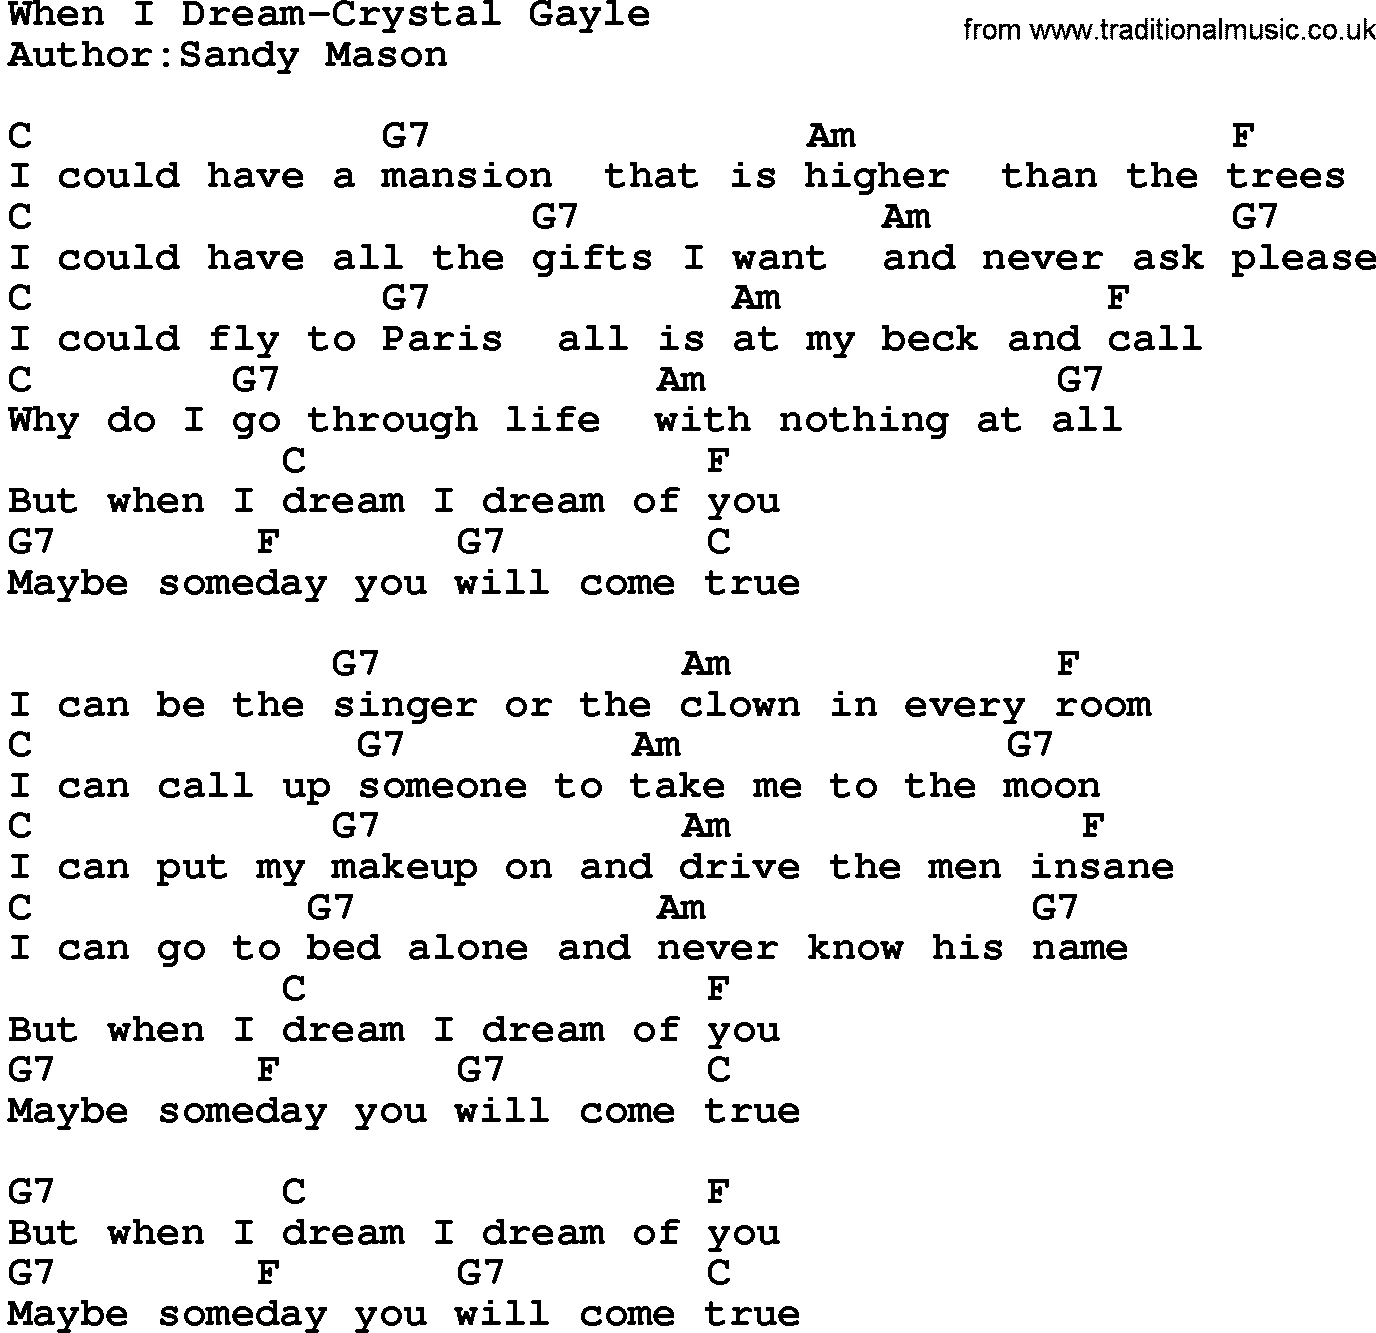 Country music song: When I Dream-Crystal Gayle lyrics and chords